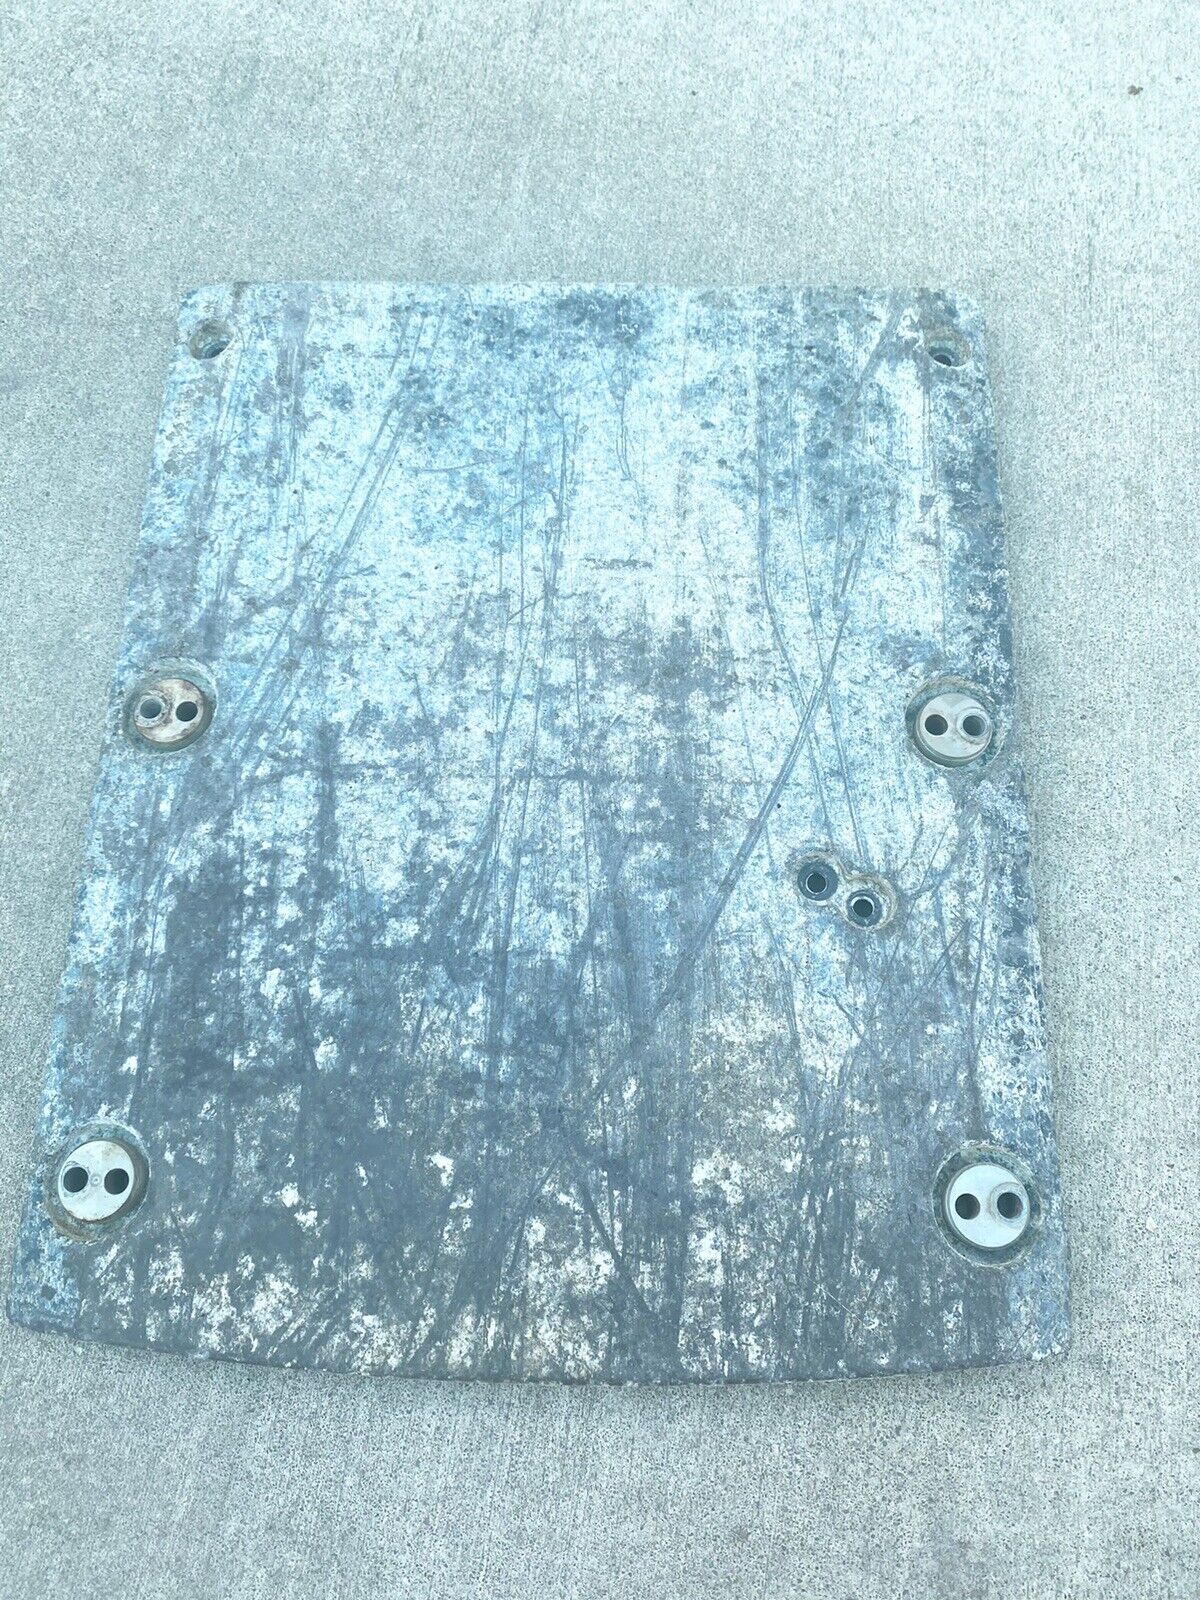 Yamaha 1992 Wave Runner Low price 650 New Shipping Free Shipping LX Ride Jet Skid Pump Cover Plate